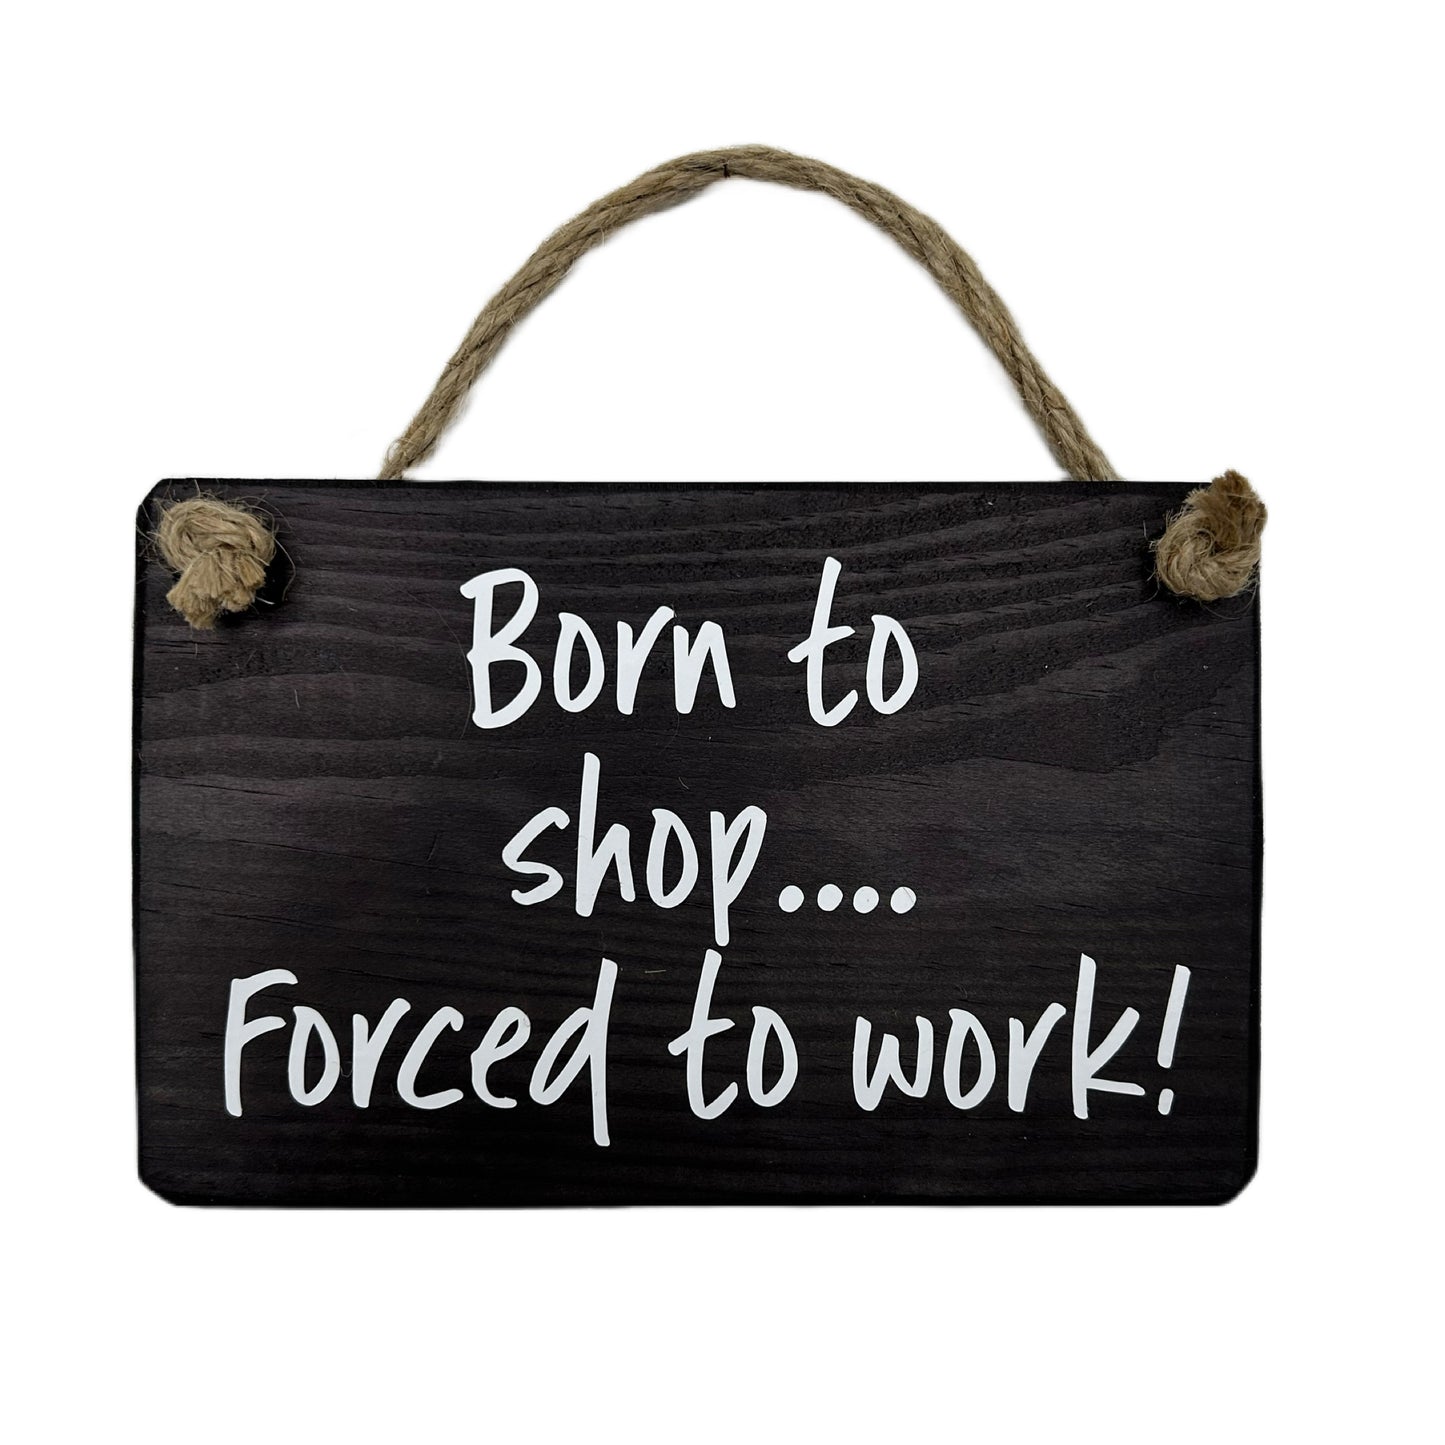 Born to shop, forced to work!